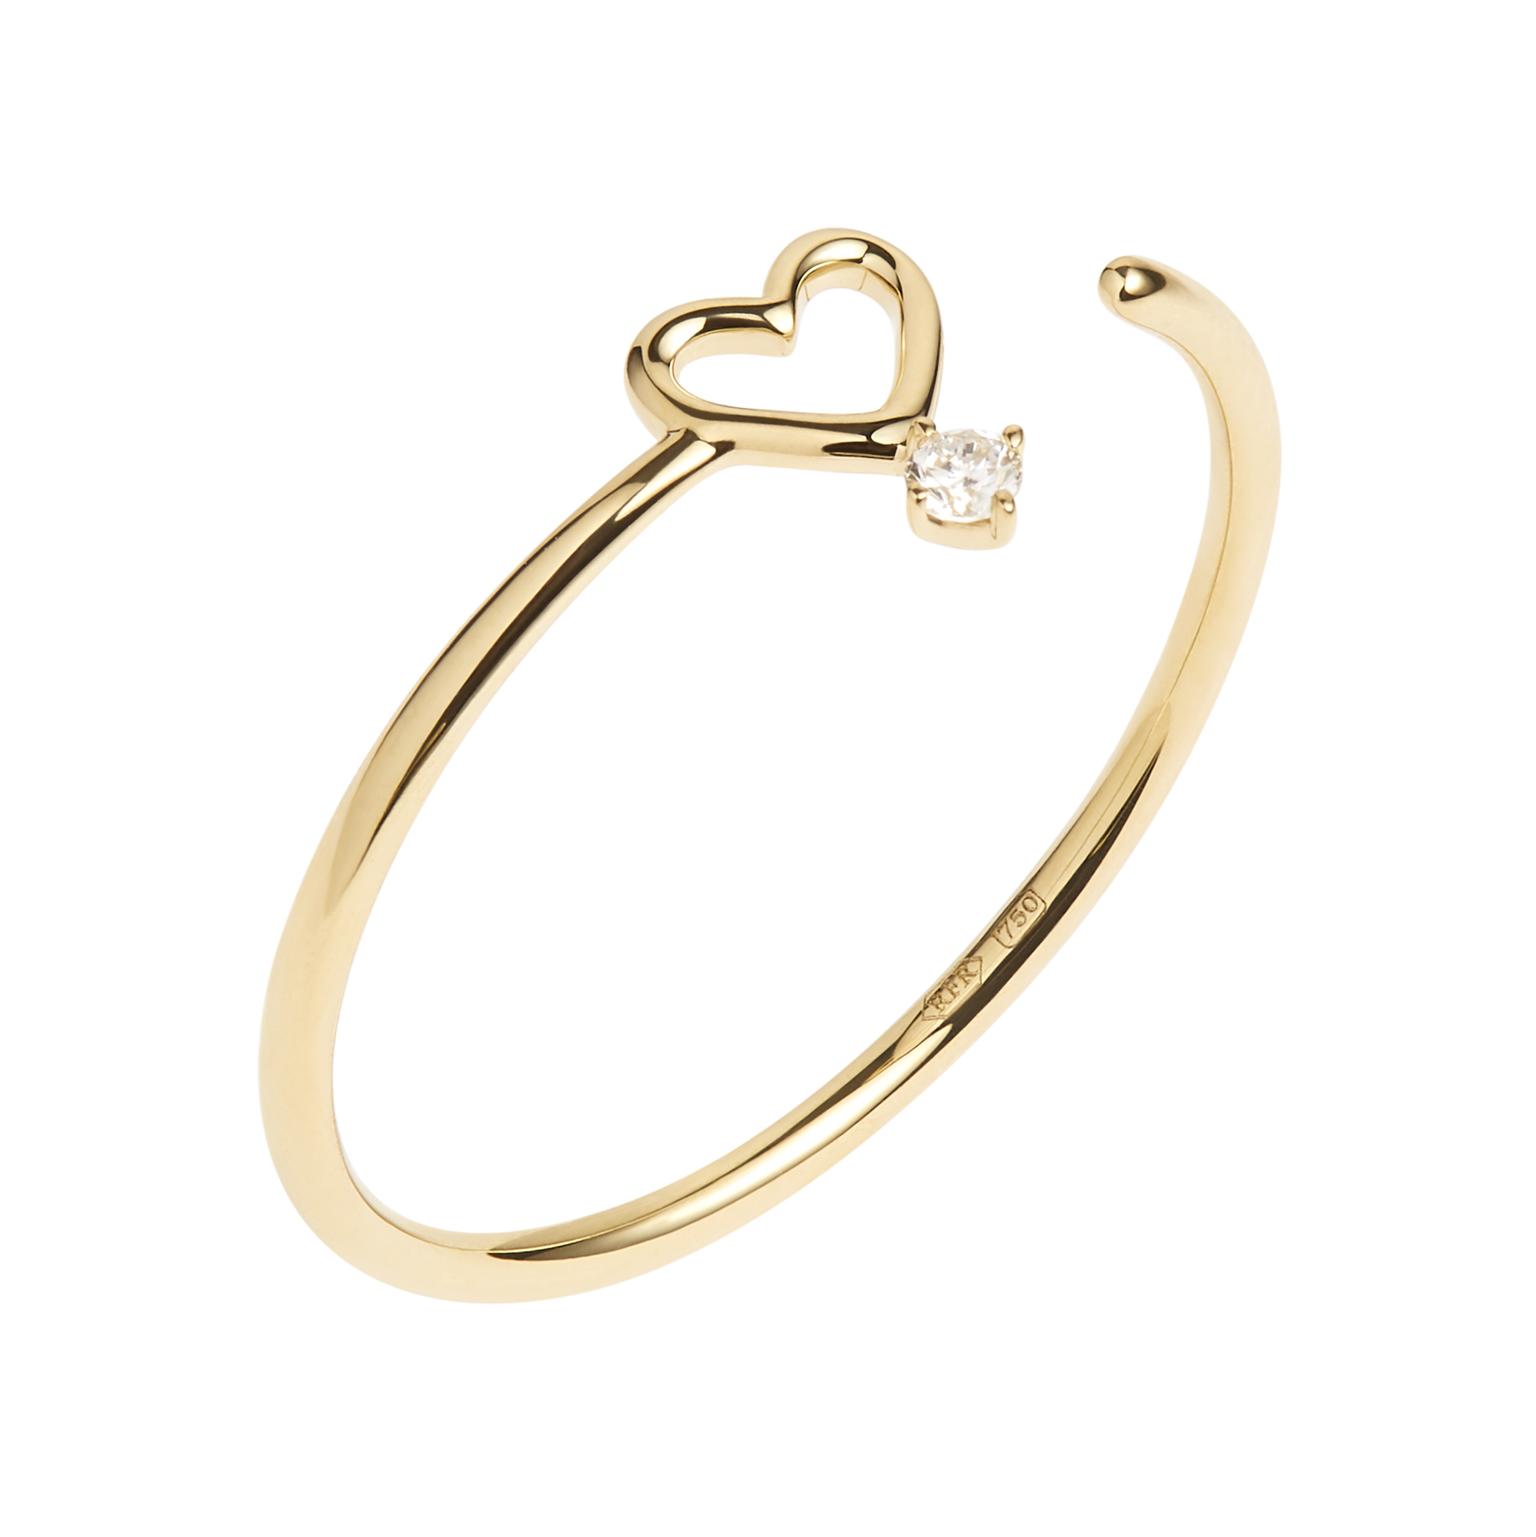  Scintilla Amore Ring by Ruifier